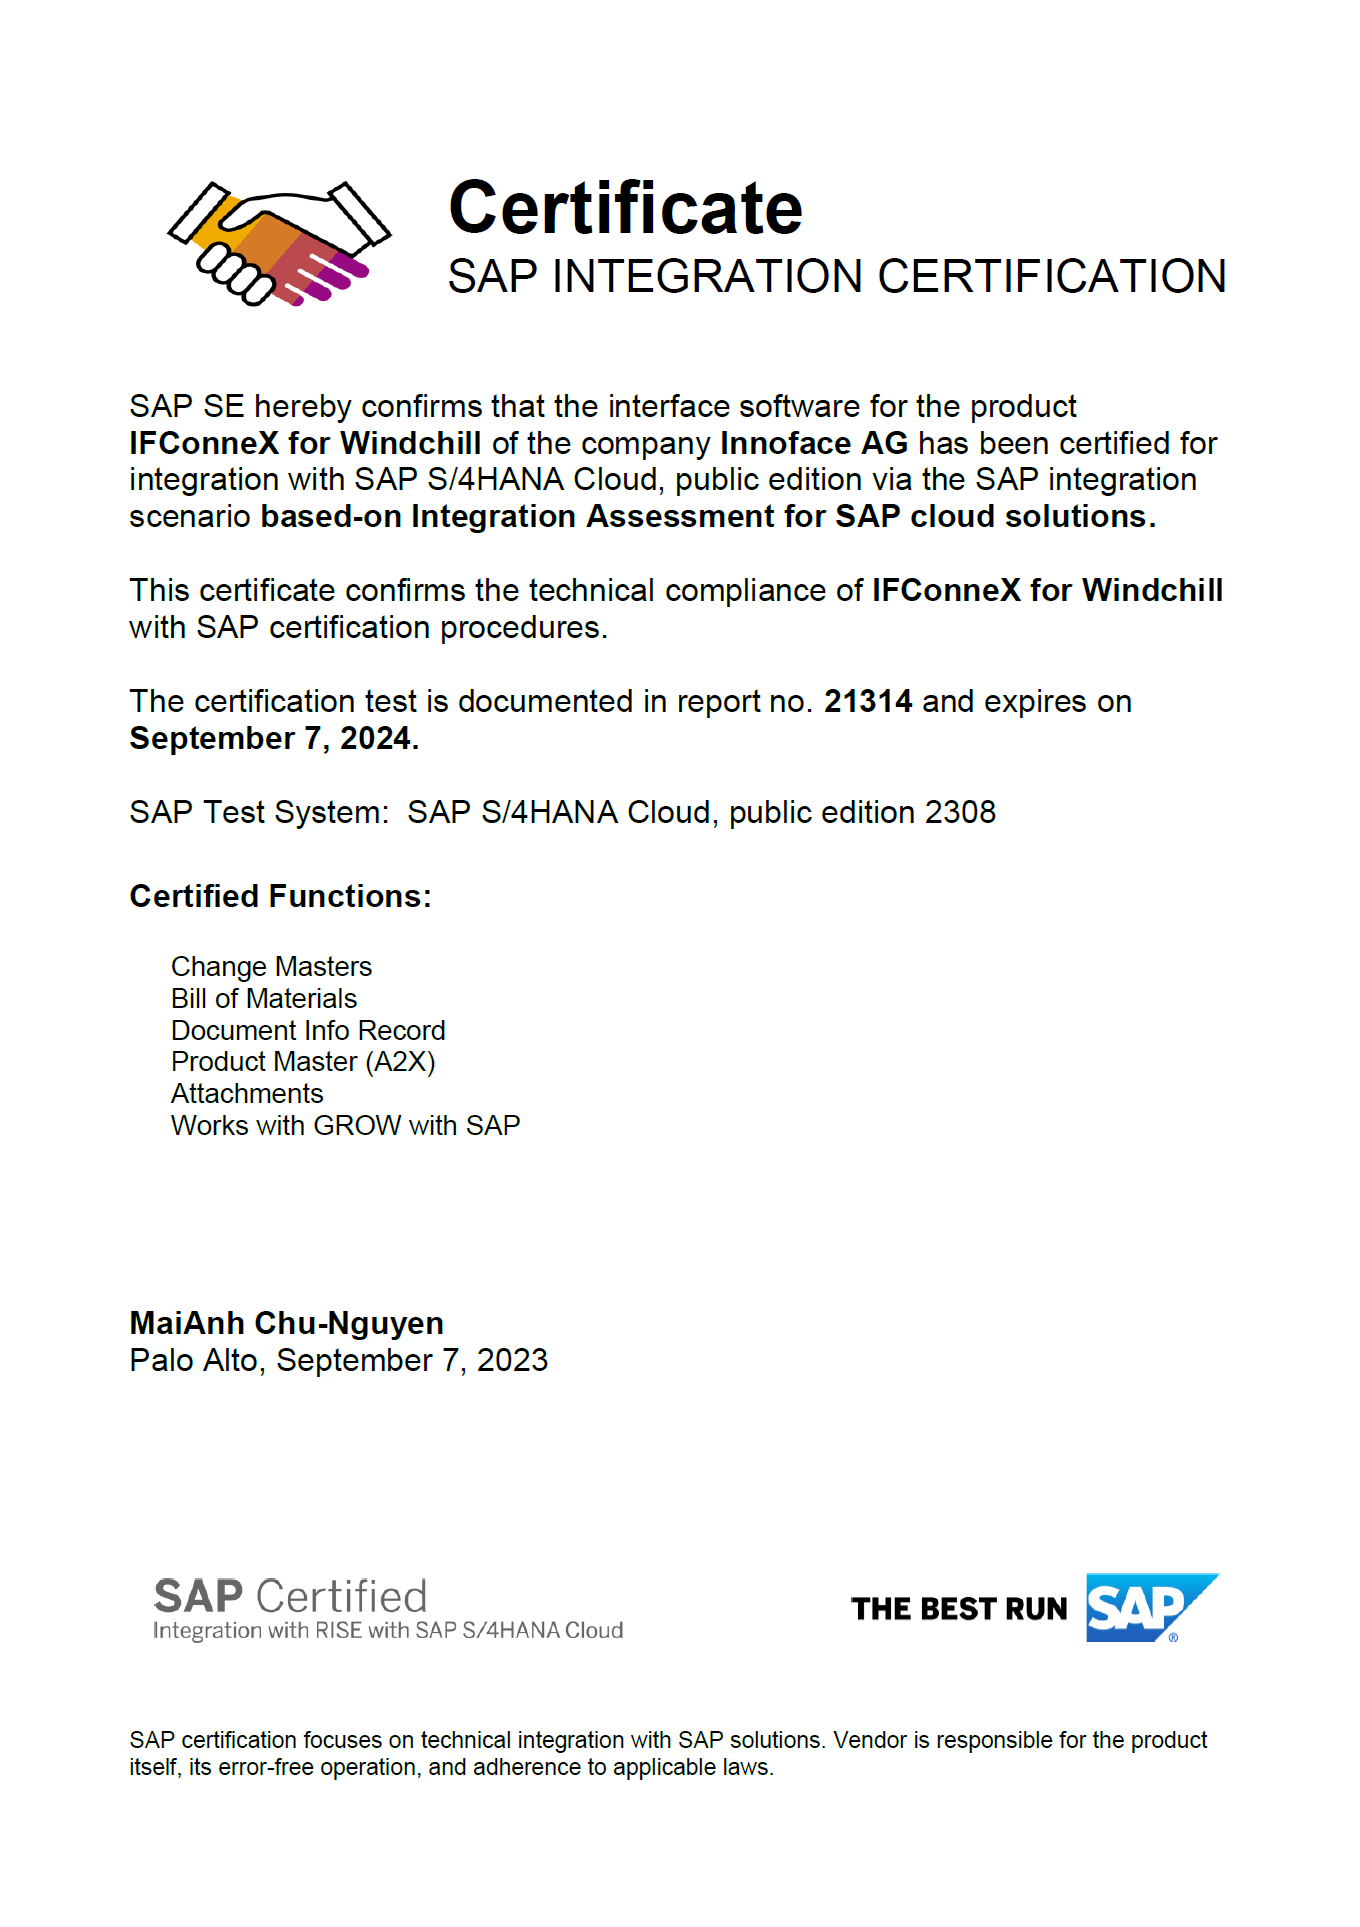 Certificate SAP IFConneX for Windchill